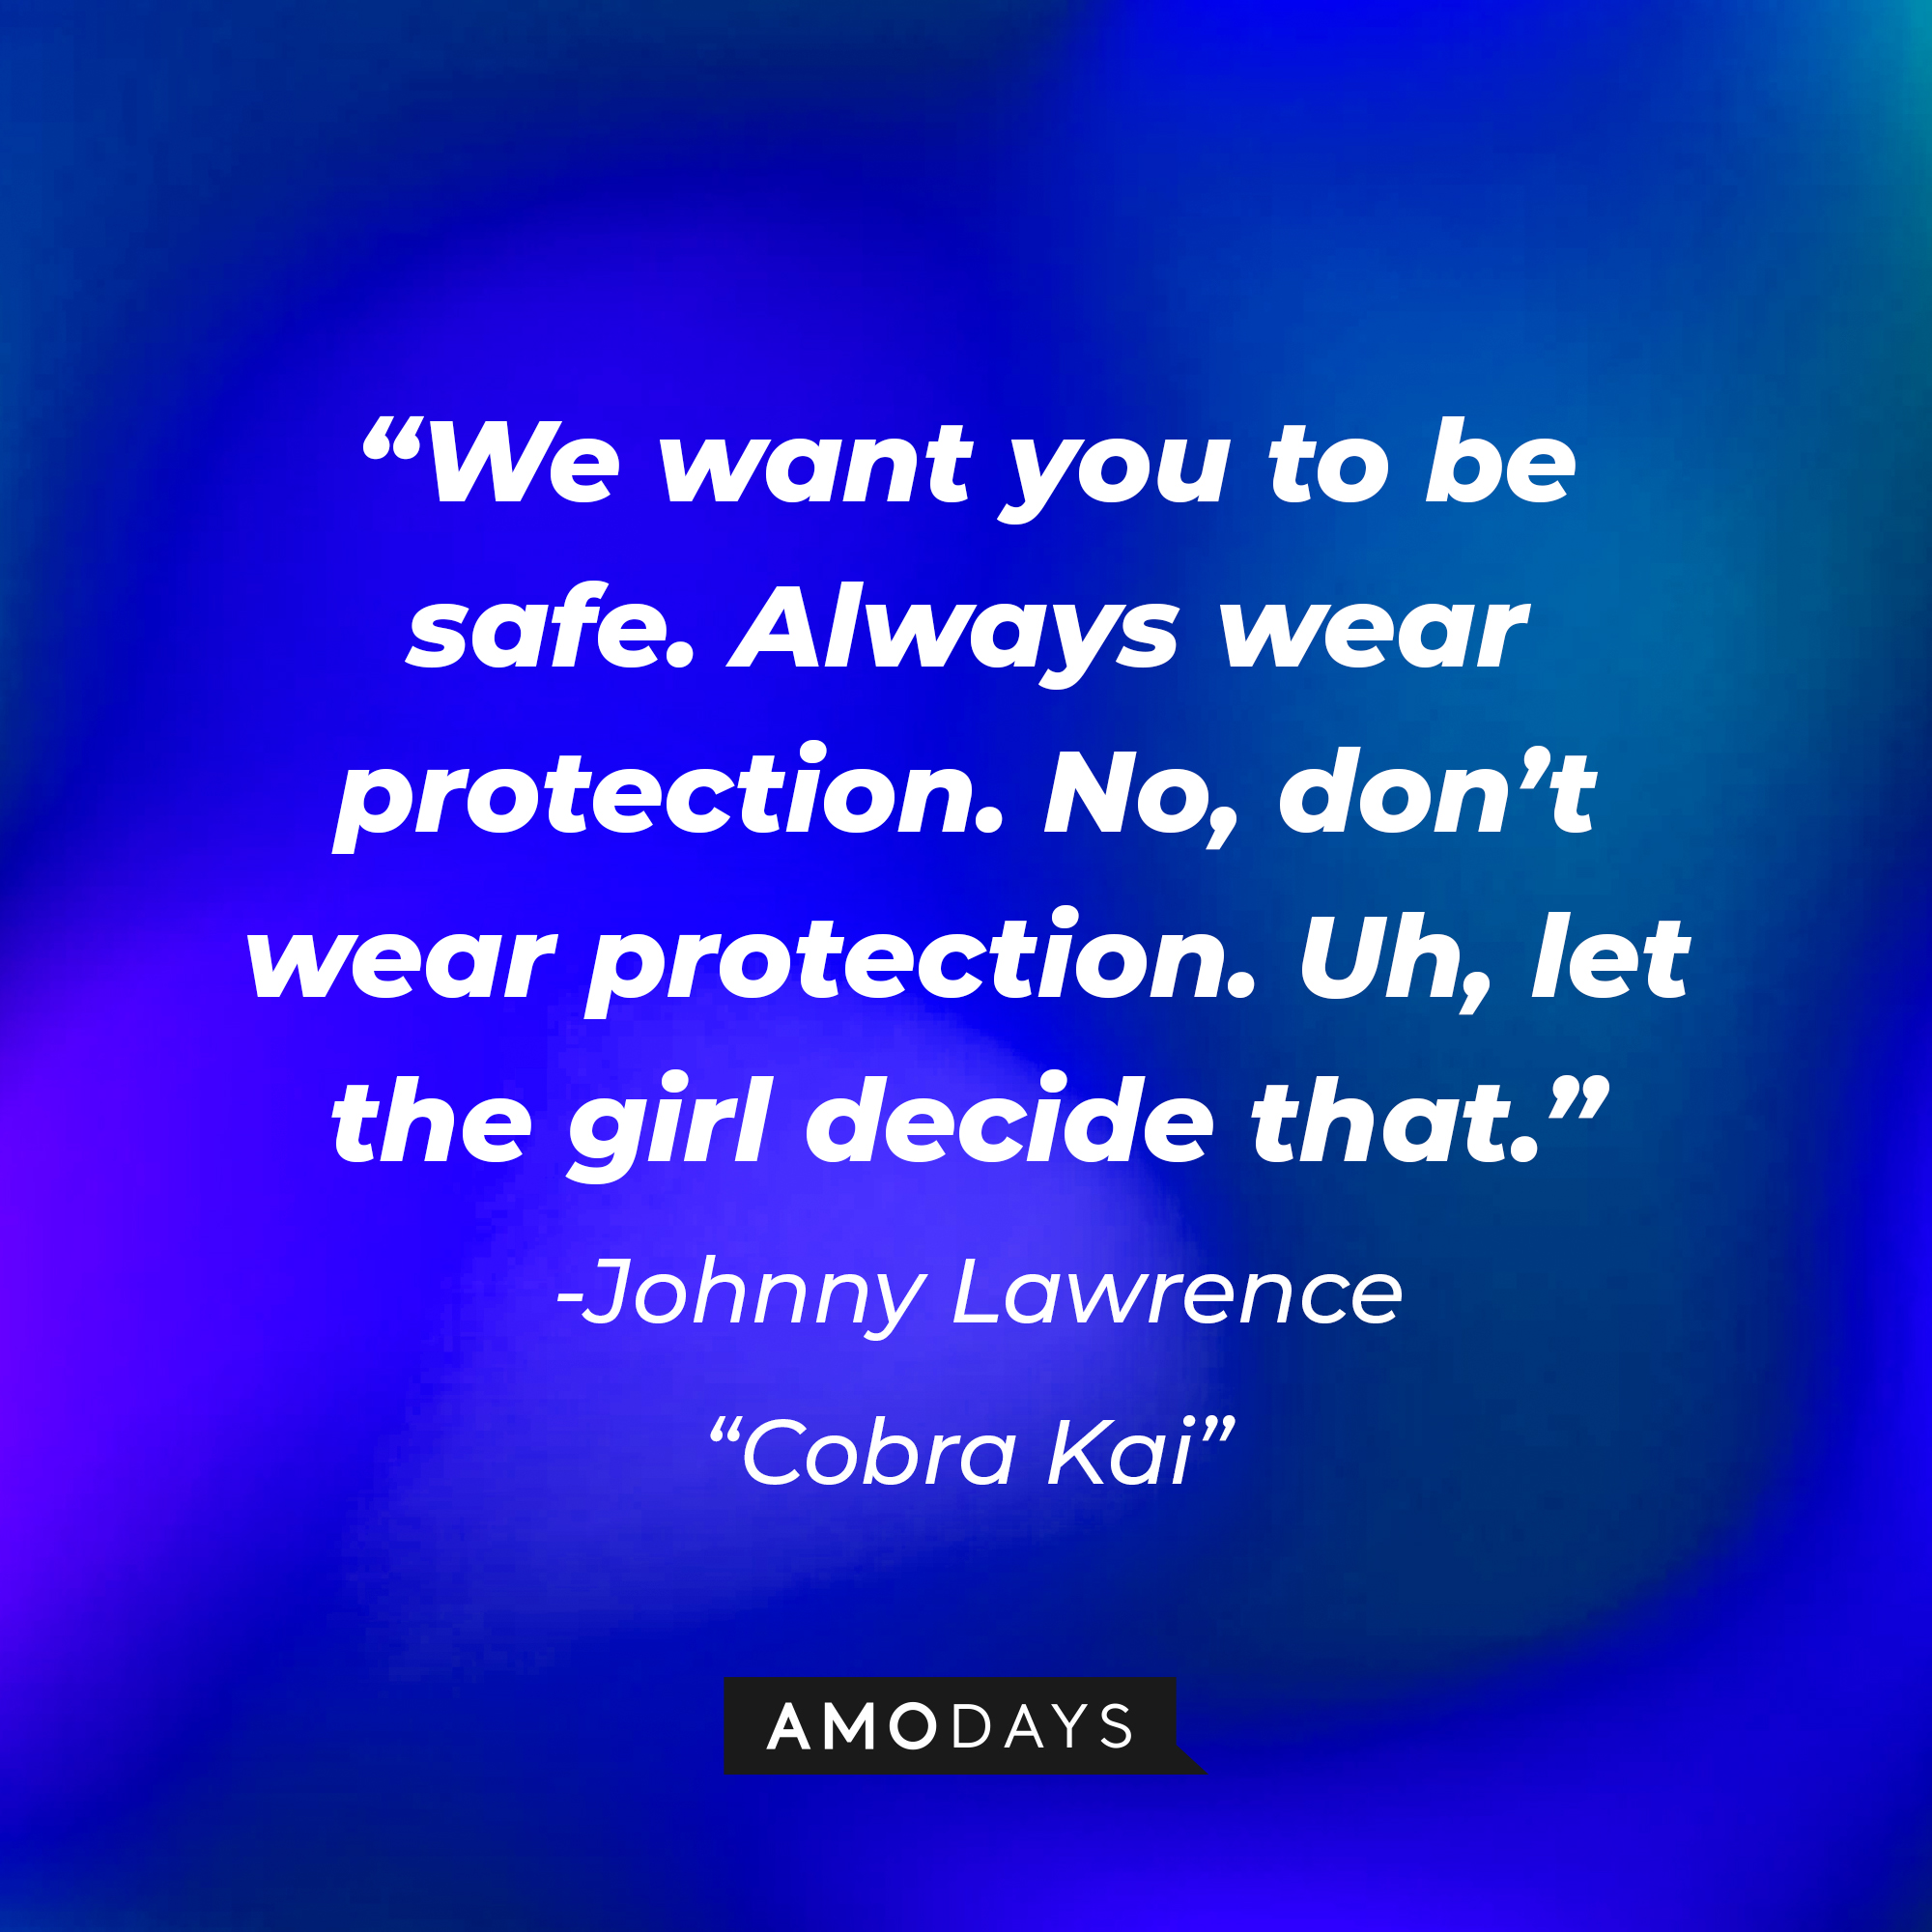 Johnny Lawrence's quote from "Cobra Kai:" “We want you to be safe. Always wear protection. No, don’t wear protection. Uh, let the girl decide that.” | Source: AmoDays